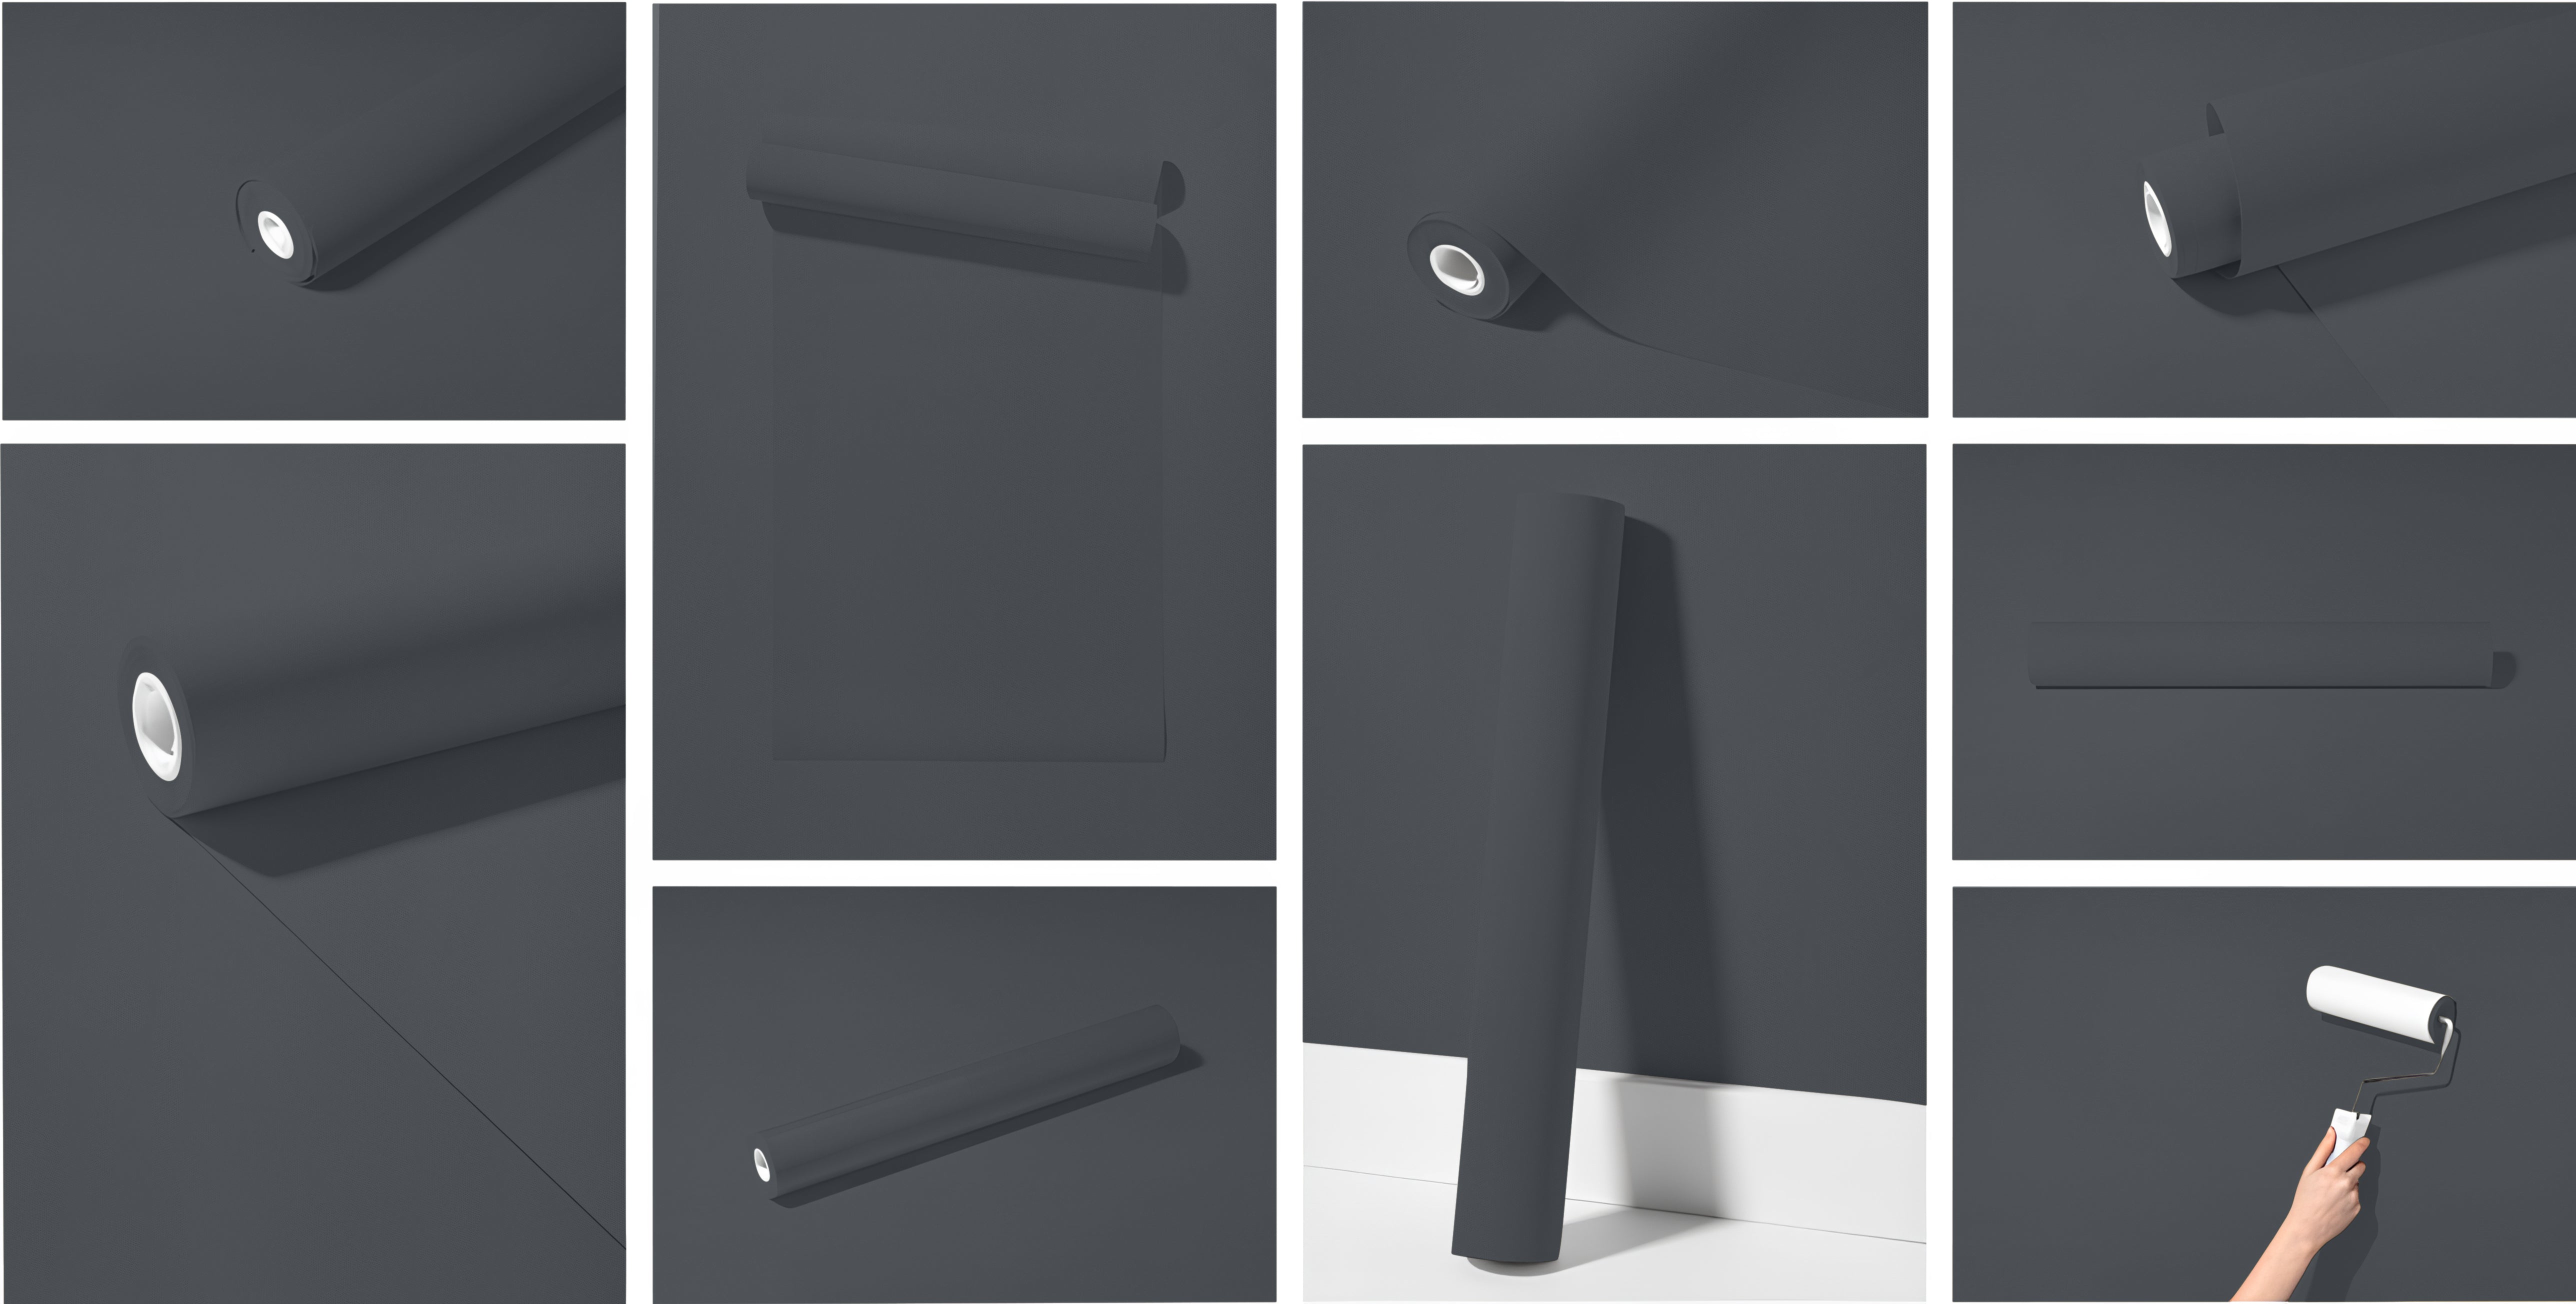 Peel & Stick Removable Re-usable Paint - Color RAL 7015 Slate Grey - offRAL™ - RALRAW LLC, USA